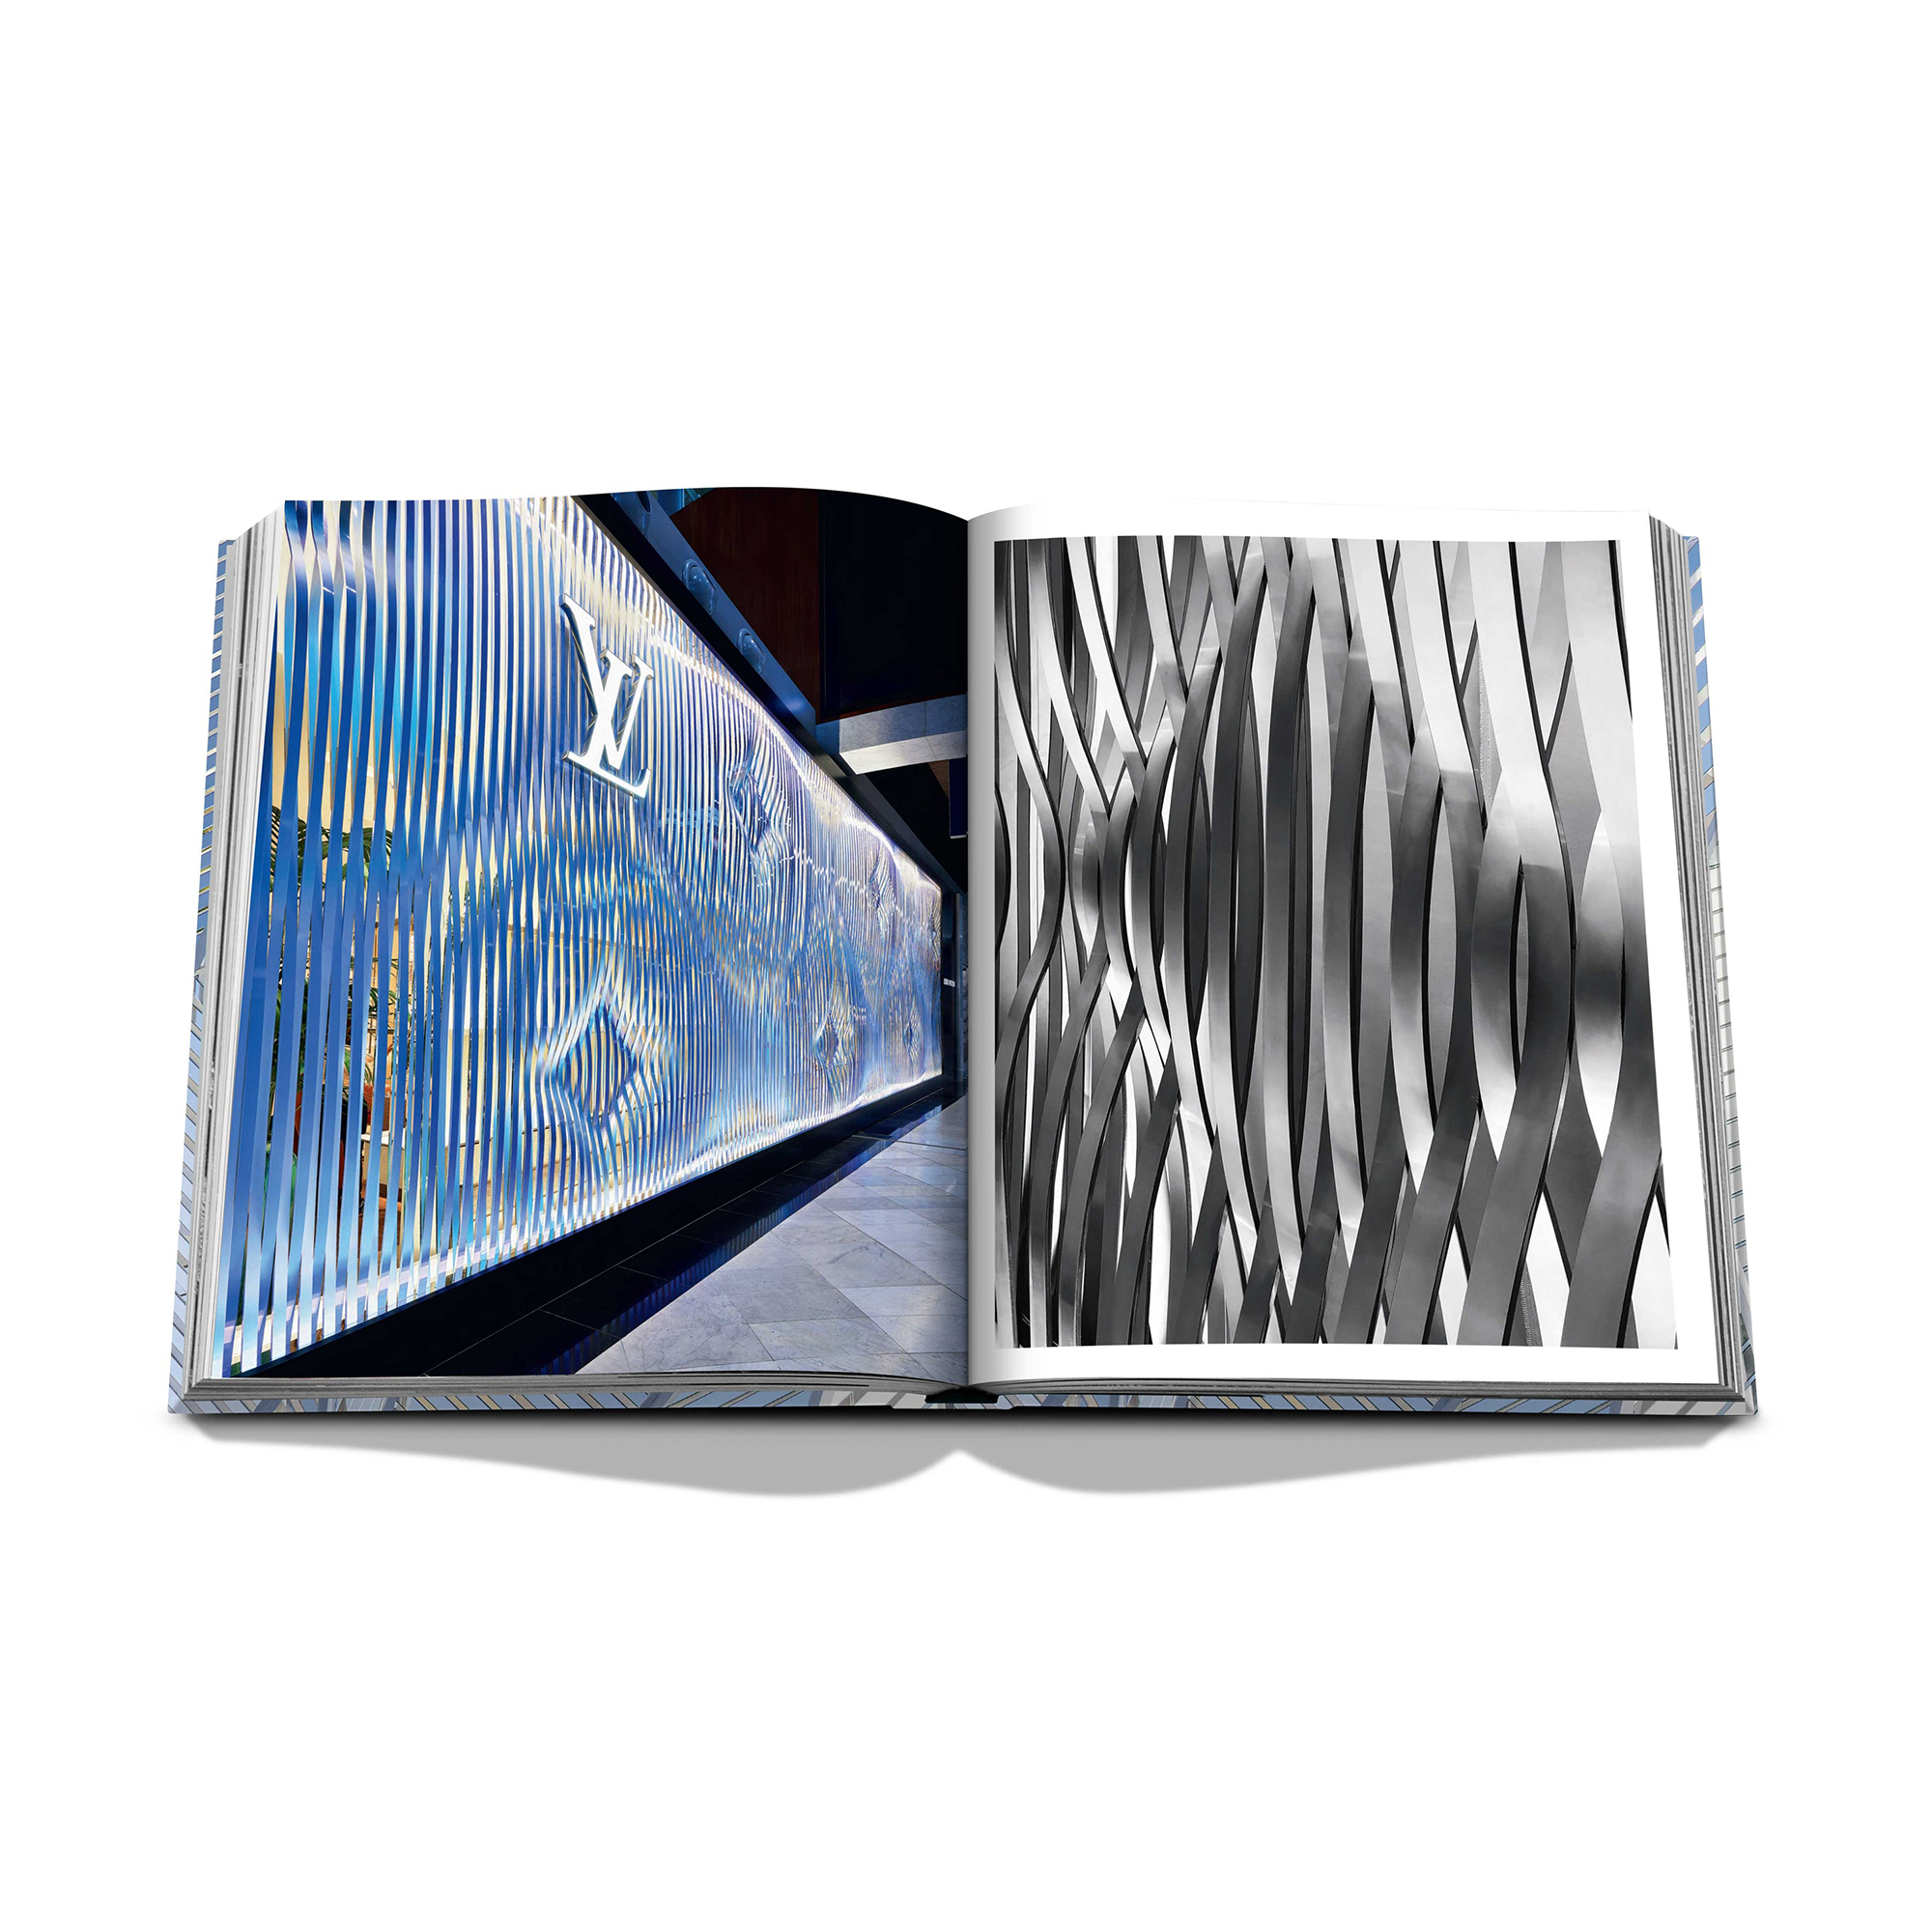 Louis Vuitton Skin: Architecture of Luxury (Seoul Edition) by Paul  Goldberger - Coffee Table Book